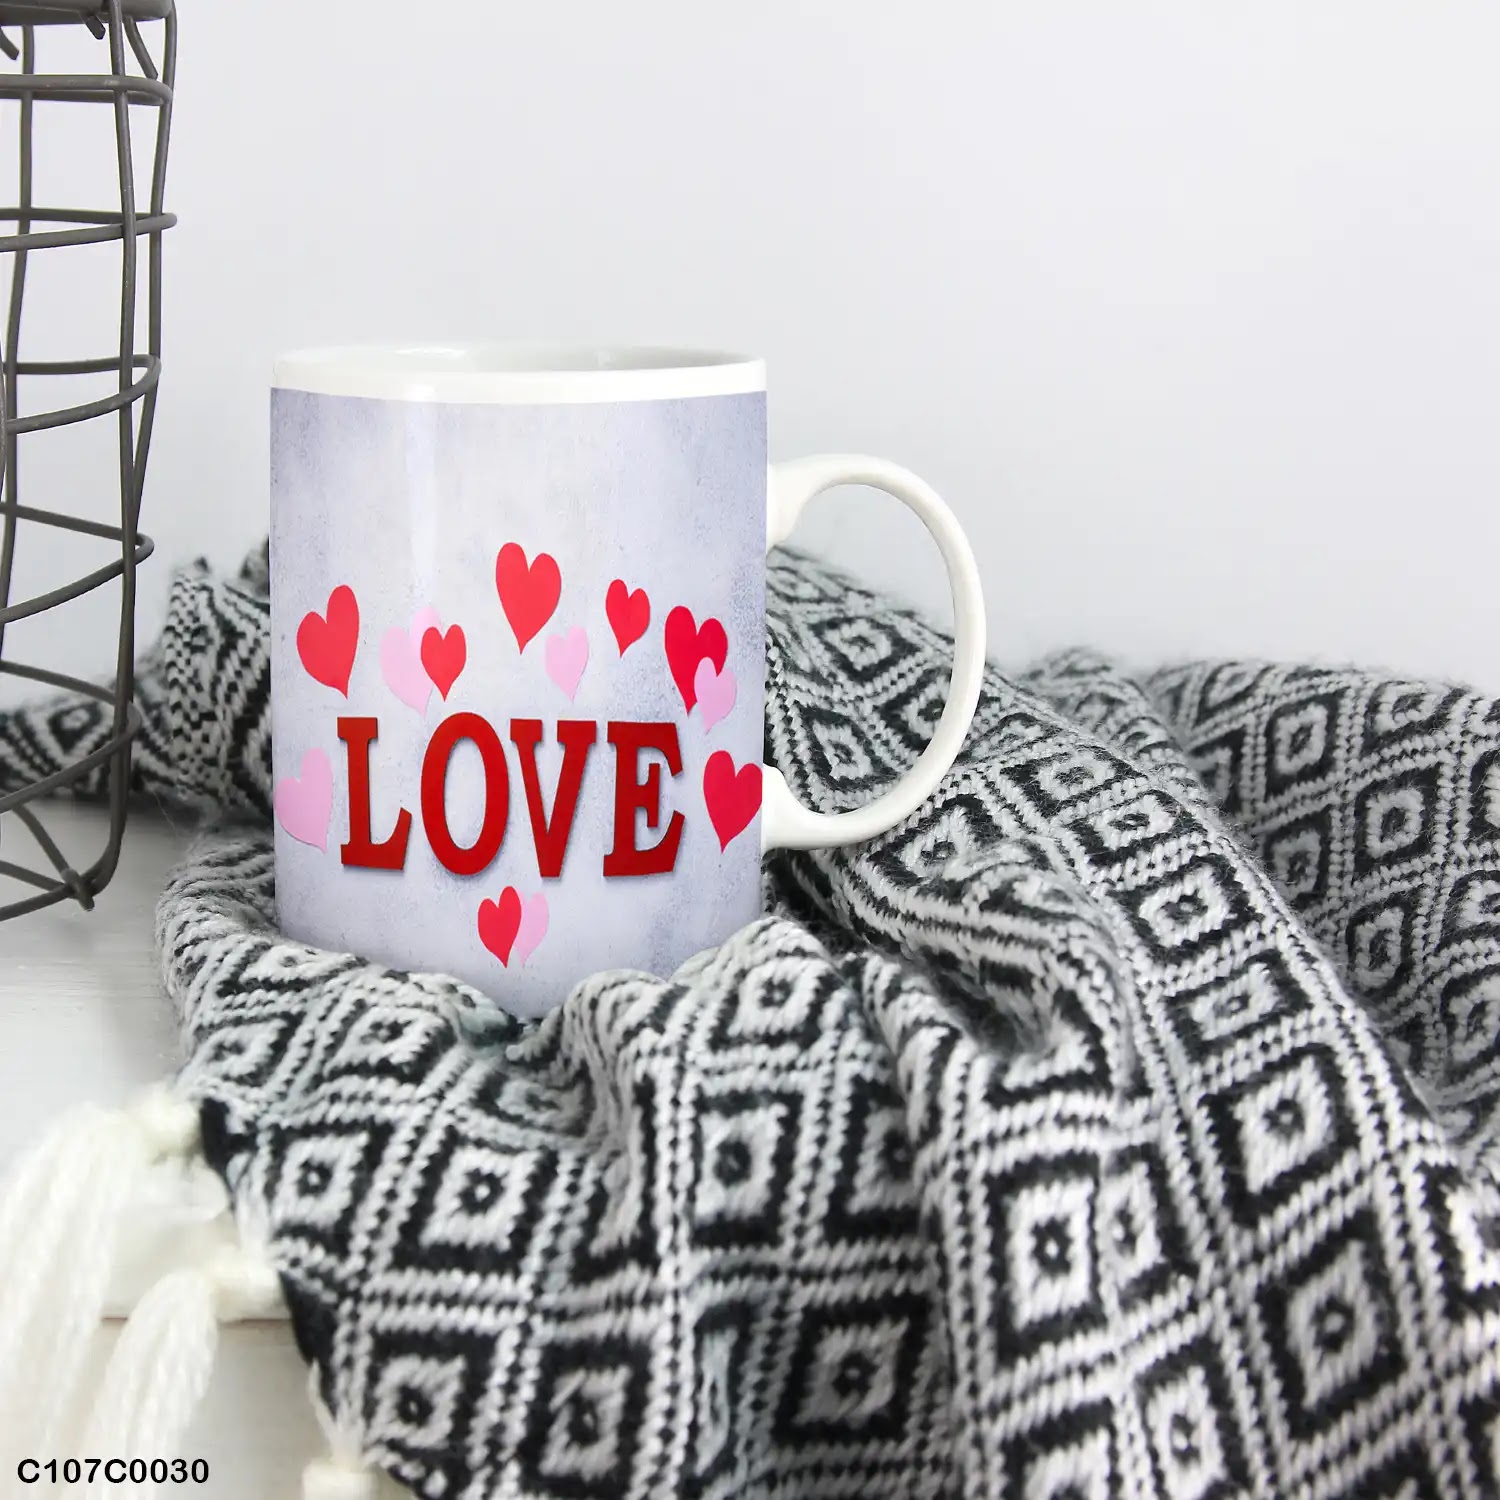 A mug (cup) printed with "LOVE" and small hearts